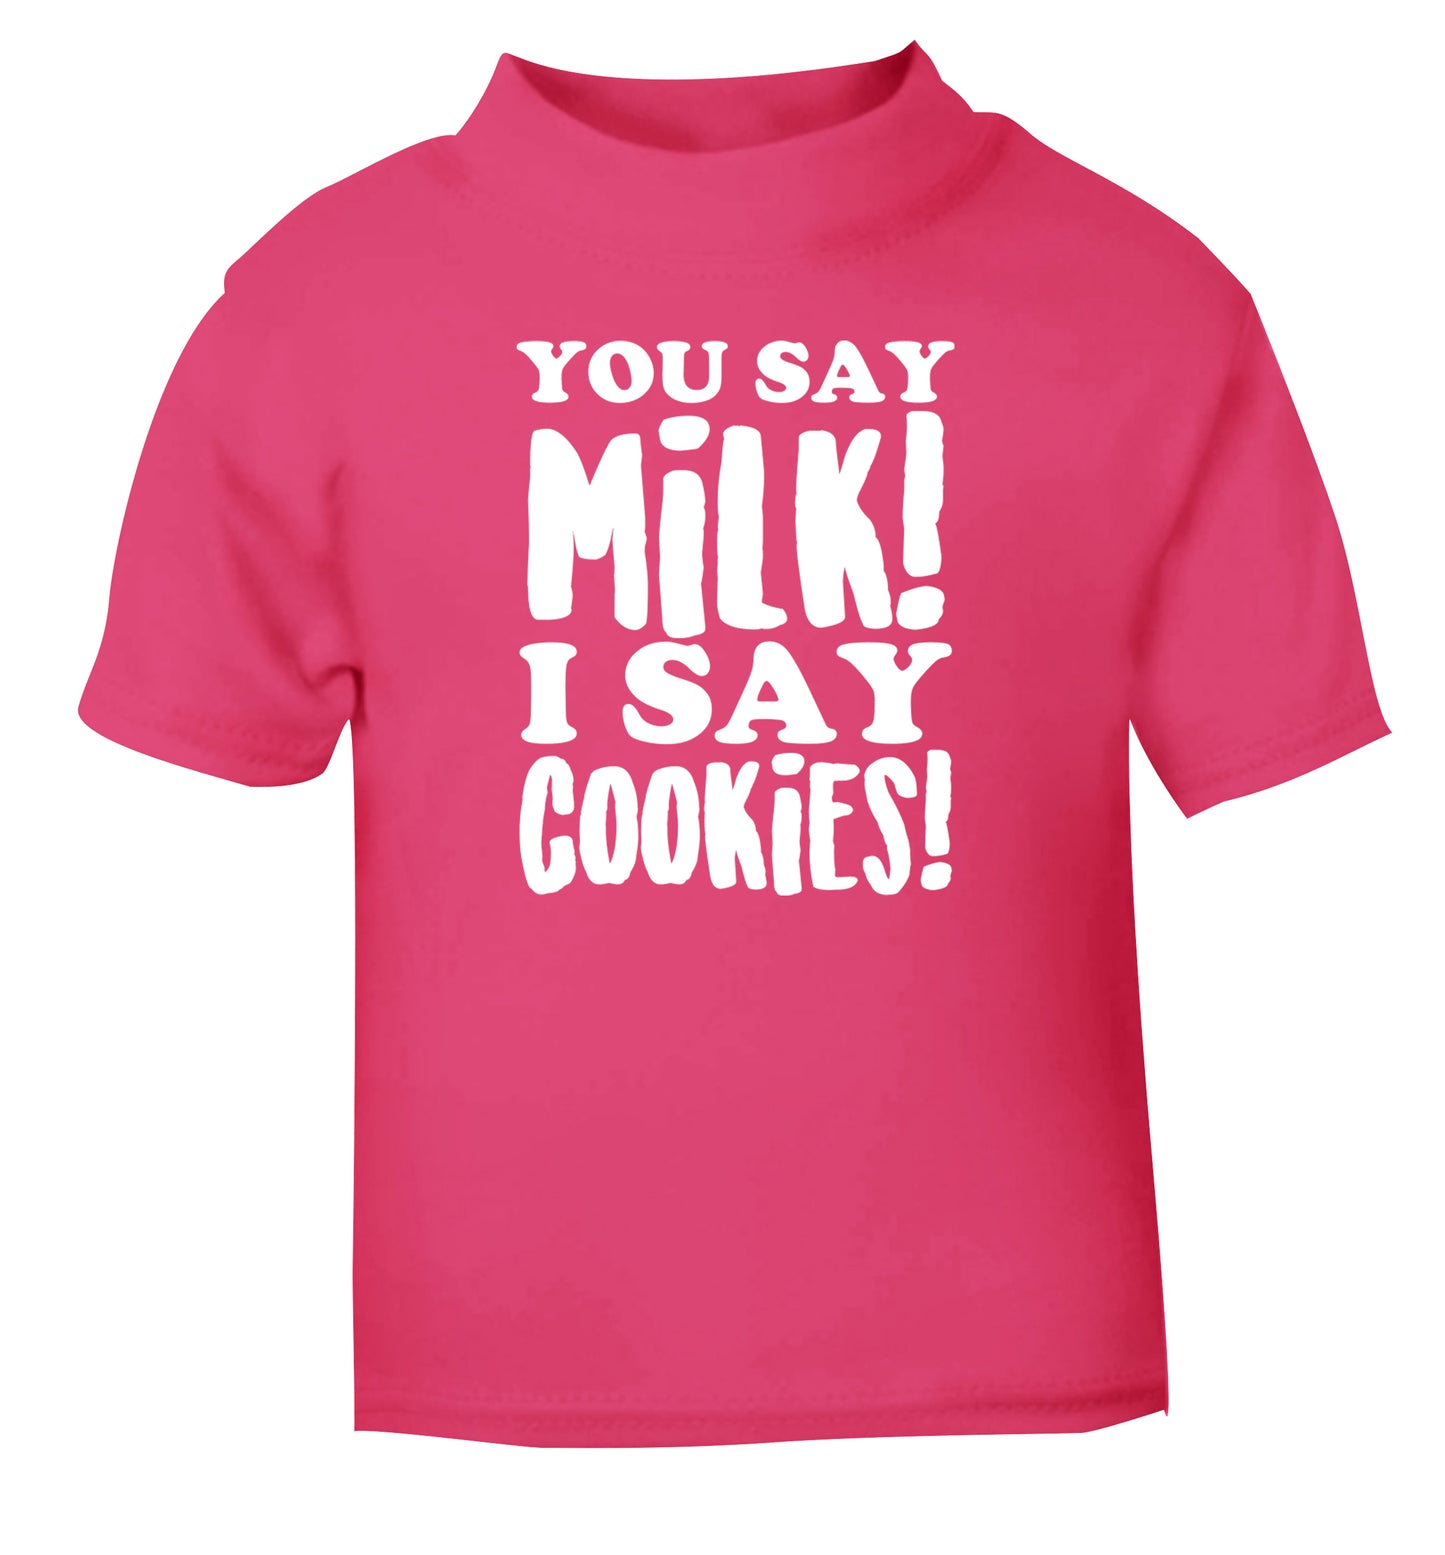 You say milk I say cookies! pink Baby Toddler Tshirt 2 Years